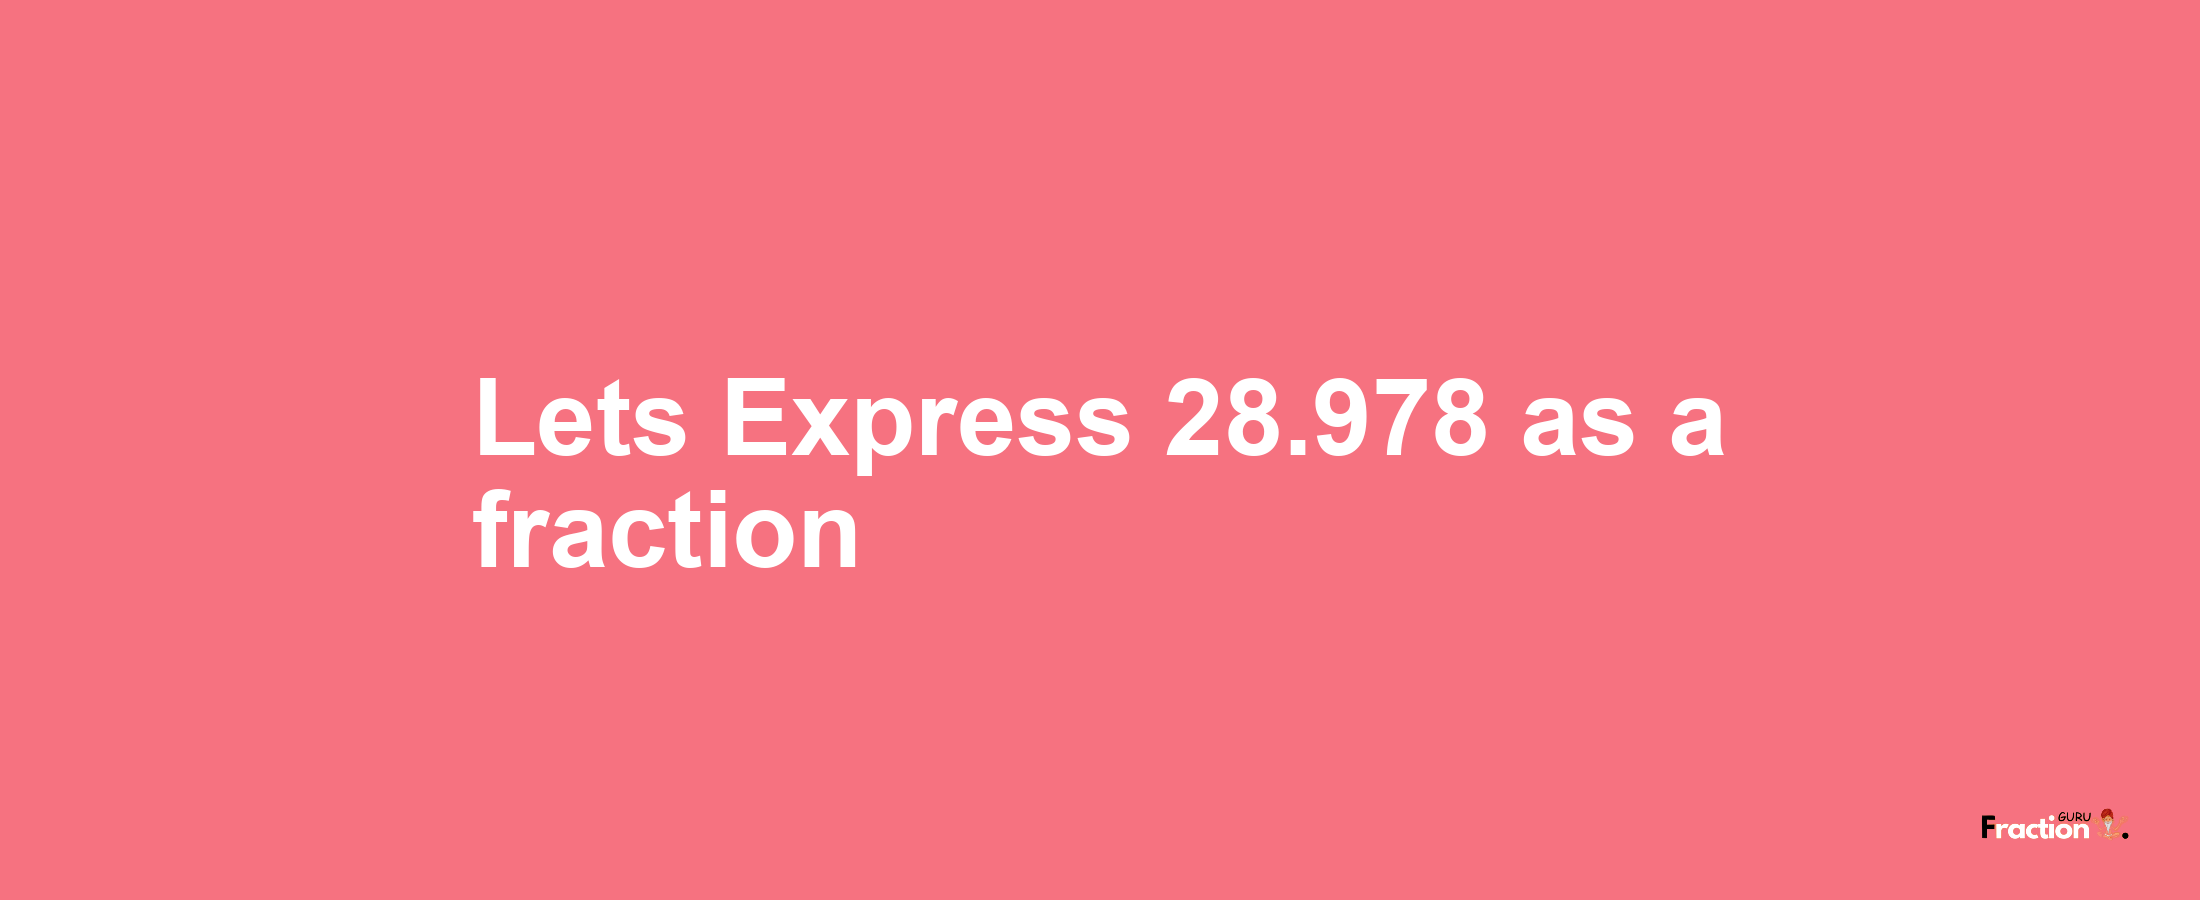 Lets Express 28.978 as afraction